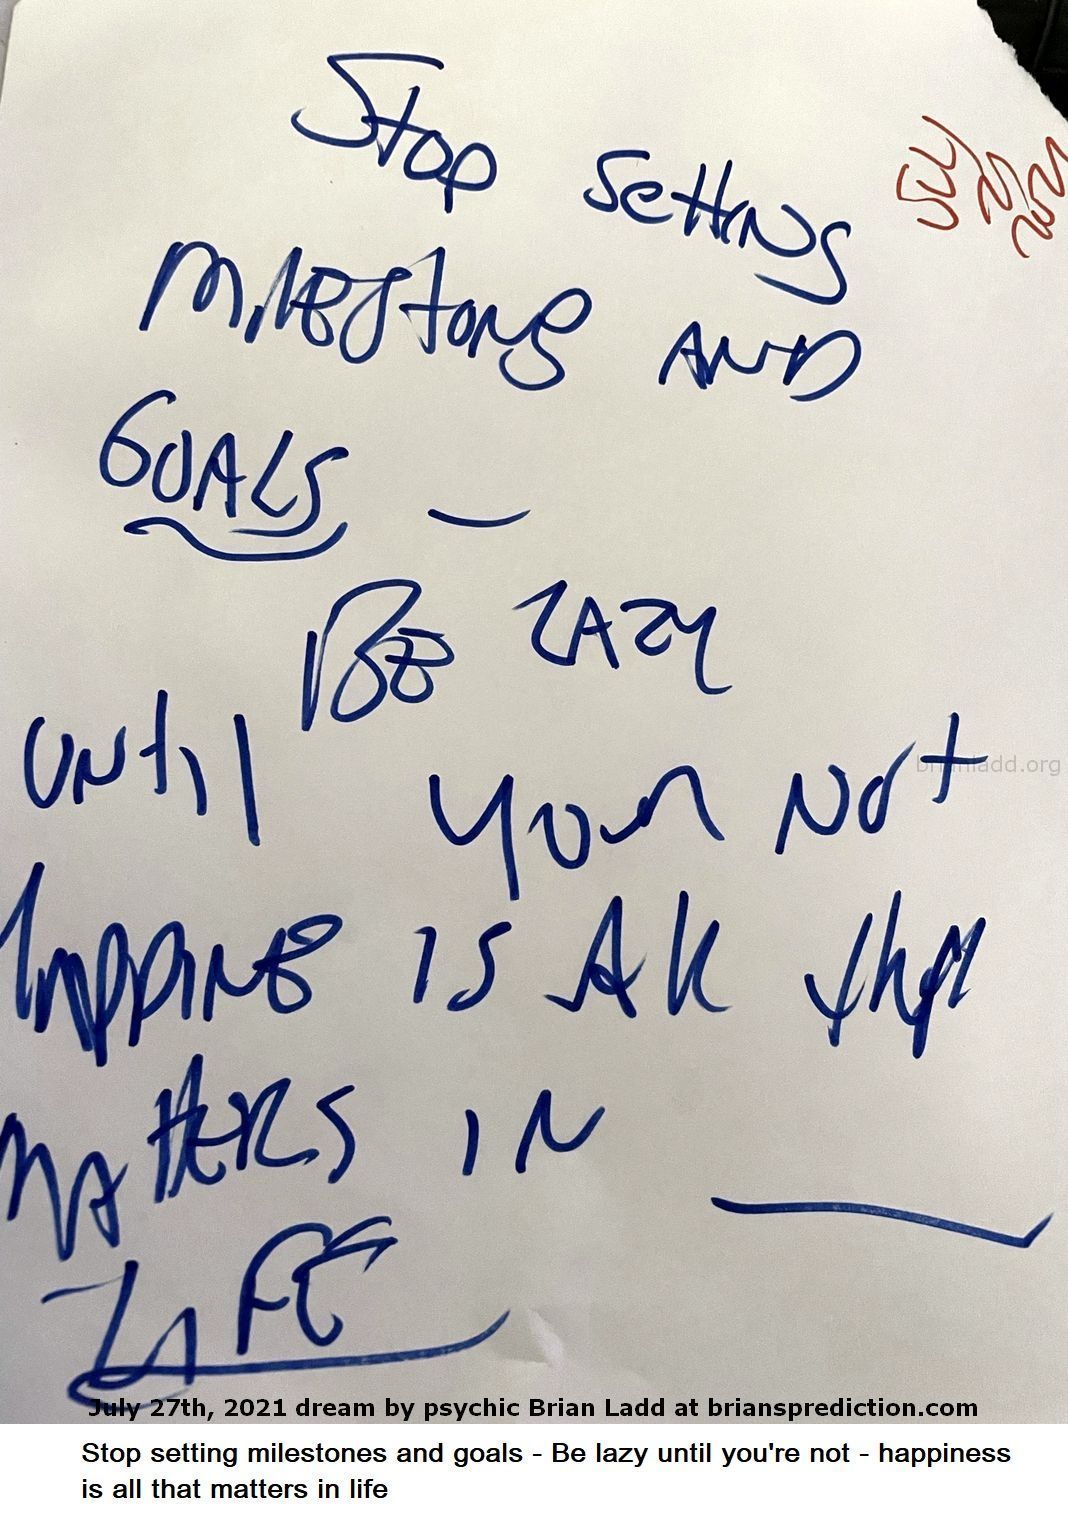 27 July 2021 1 Stop Setting Milestones And Goals Be Lazy Until You'Re Not Happiness Is All That Matters In Life  - ...
Stop setting milestones and goals - Be lazy until you're not - happiness is all that matters in life.
